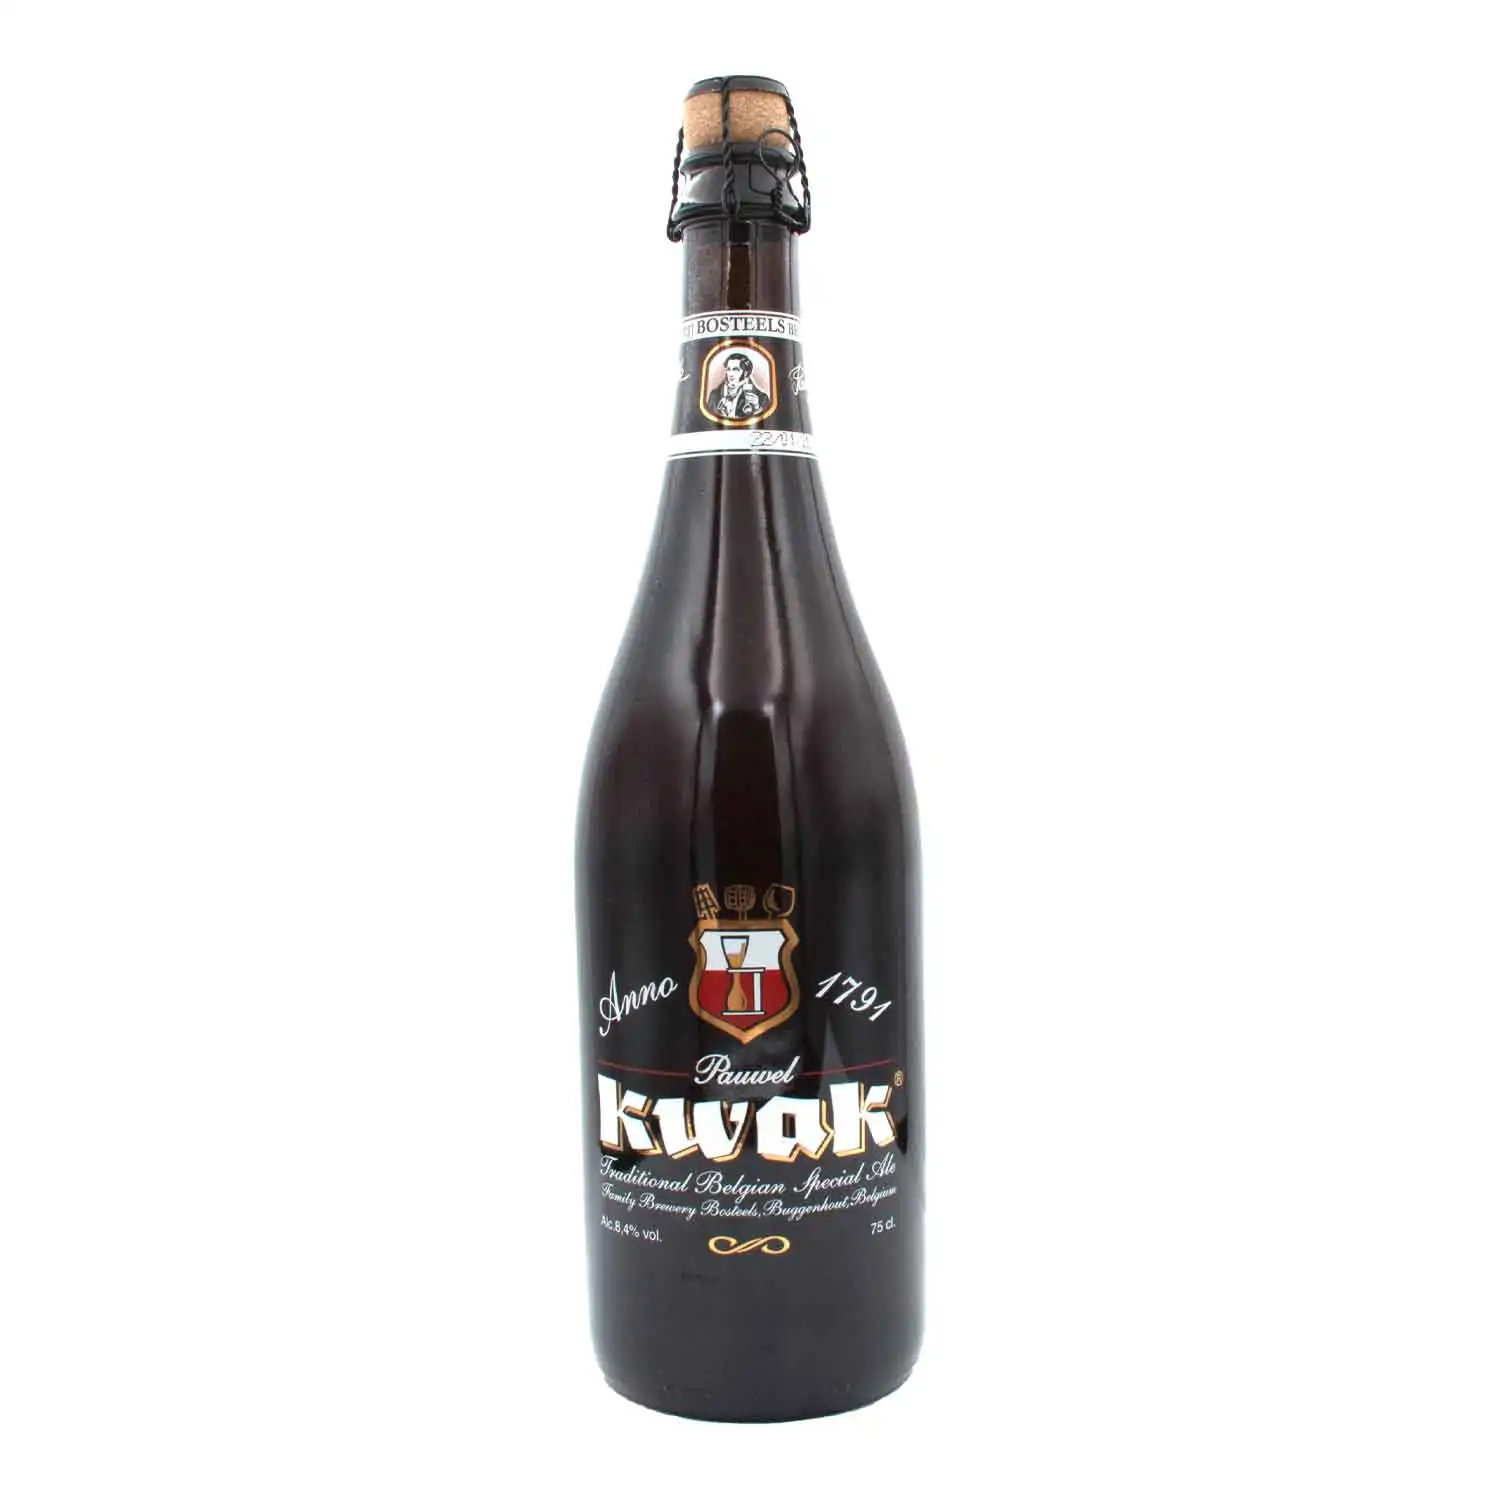 Kwak amber 75cl Alc 8,4% - Buy at Real Tobacco